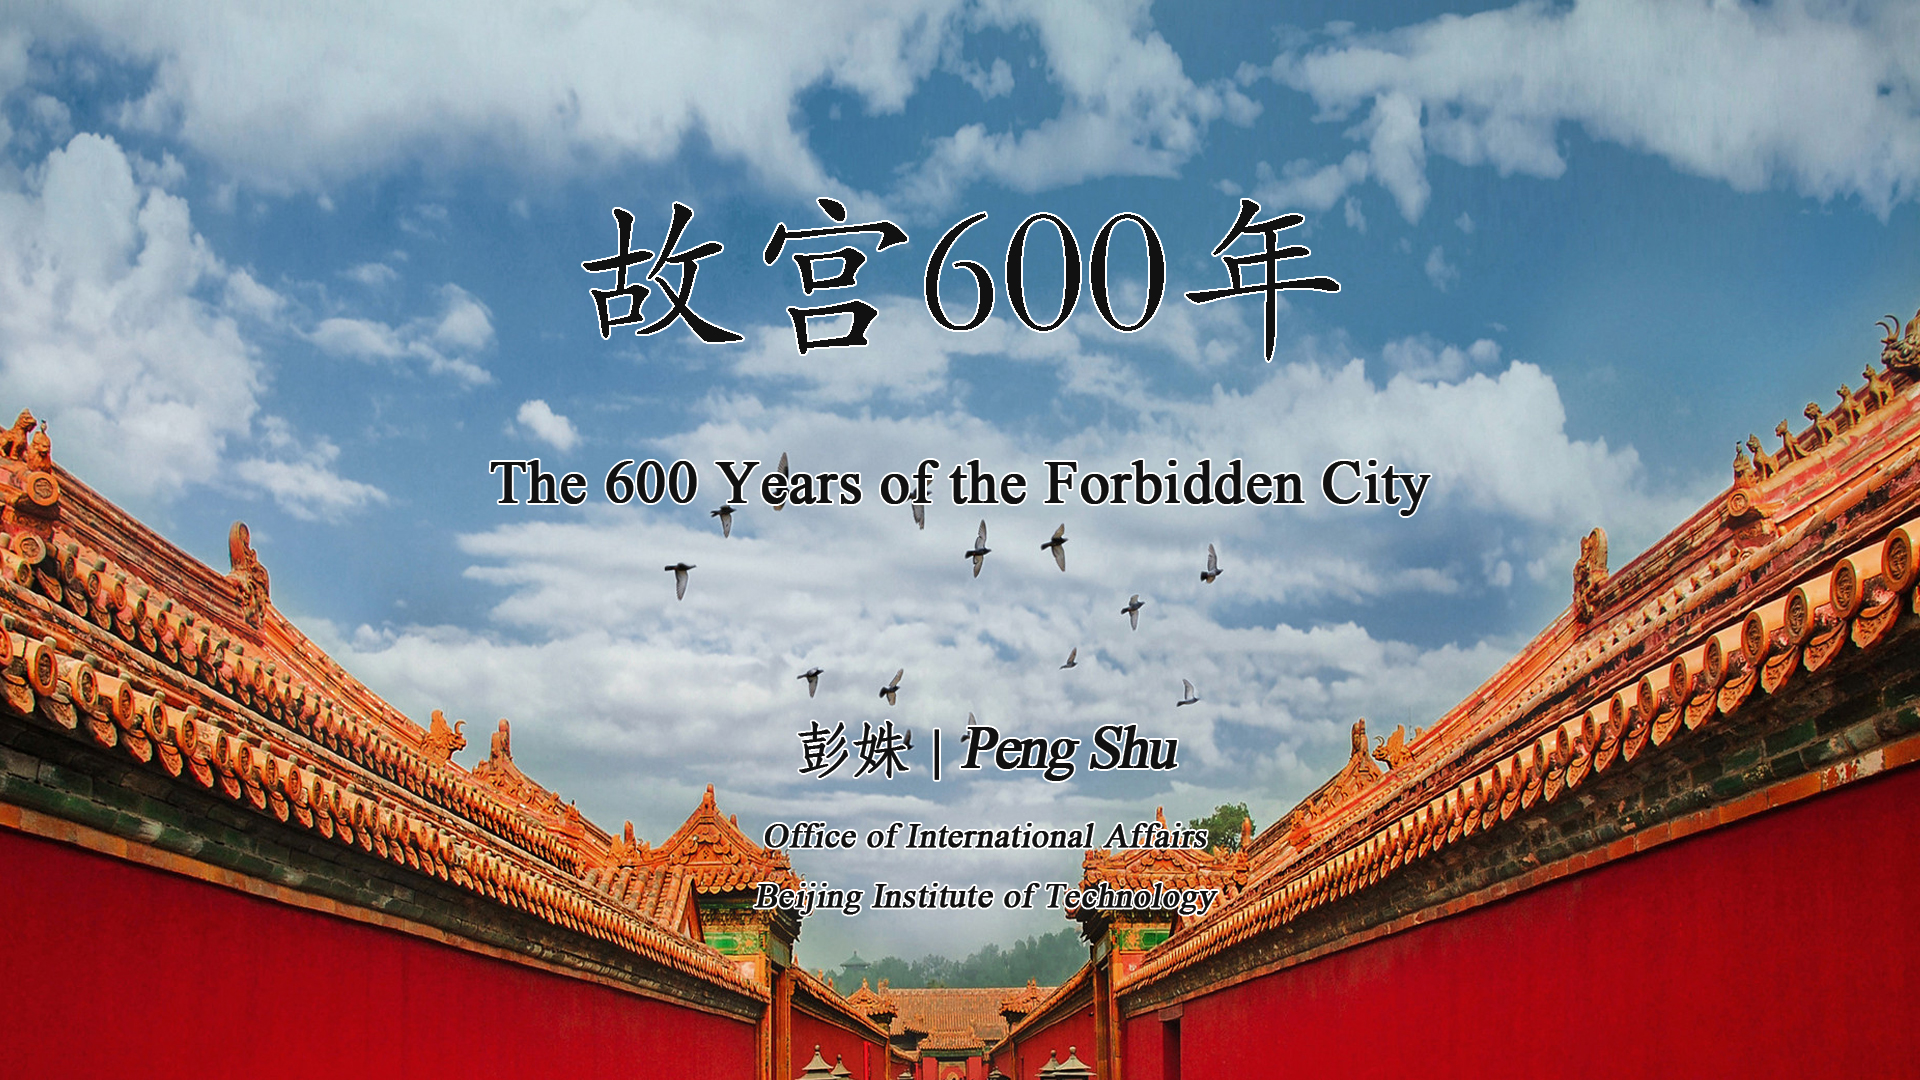 The 600 years of the Forbidden City